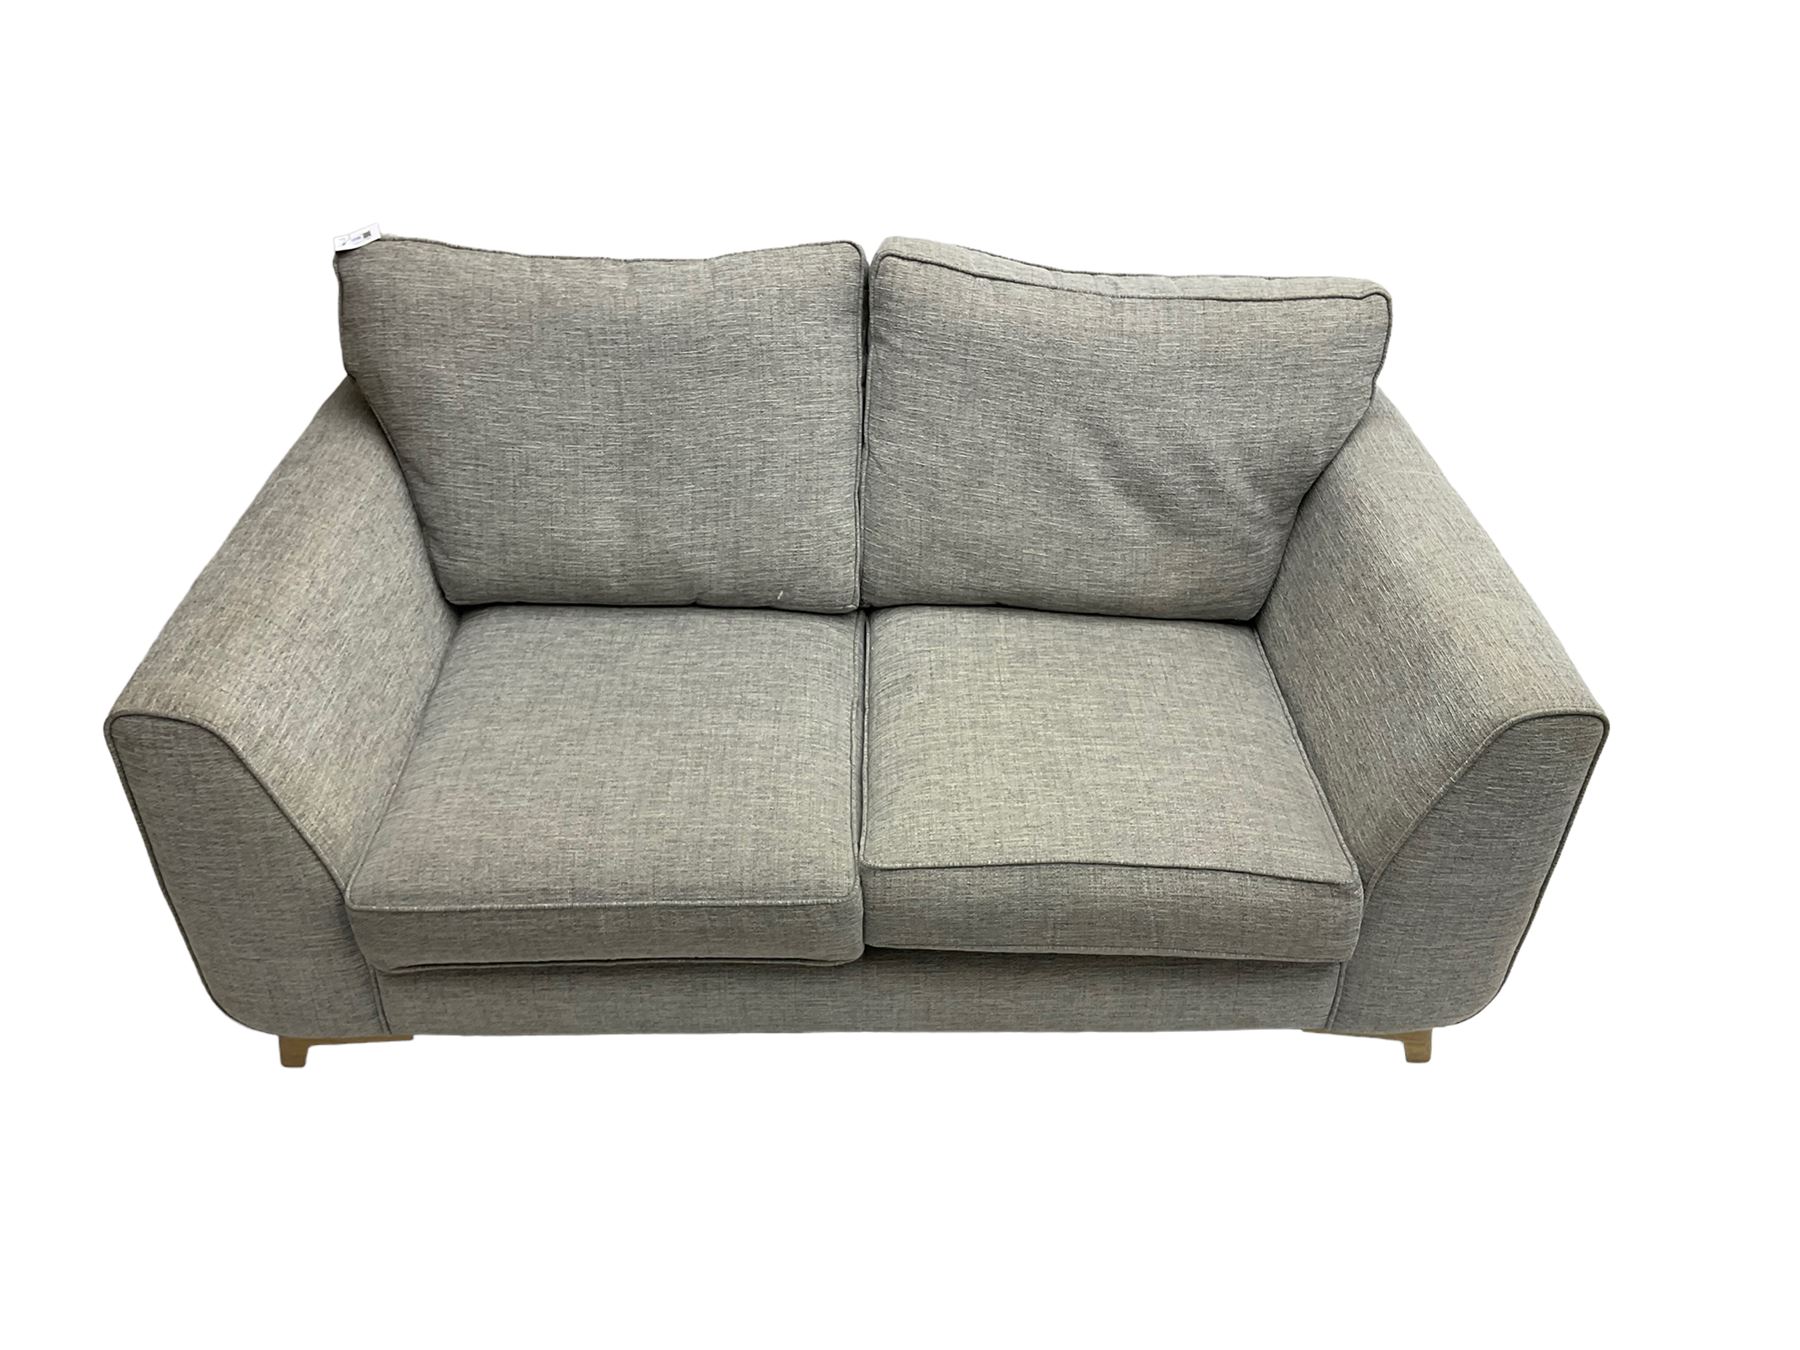 Two seat sofa upholstered in graphite grey fabric - Image 5 of 7